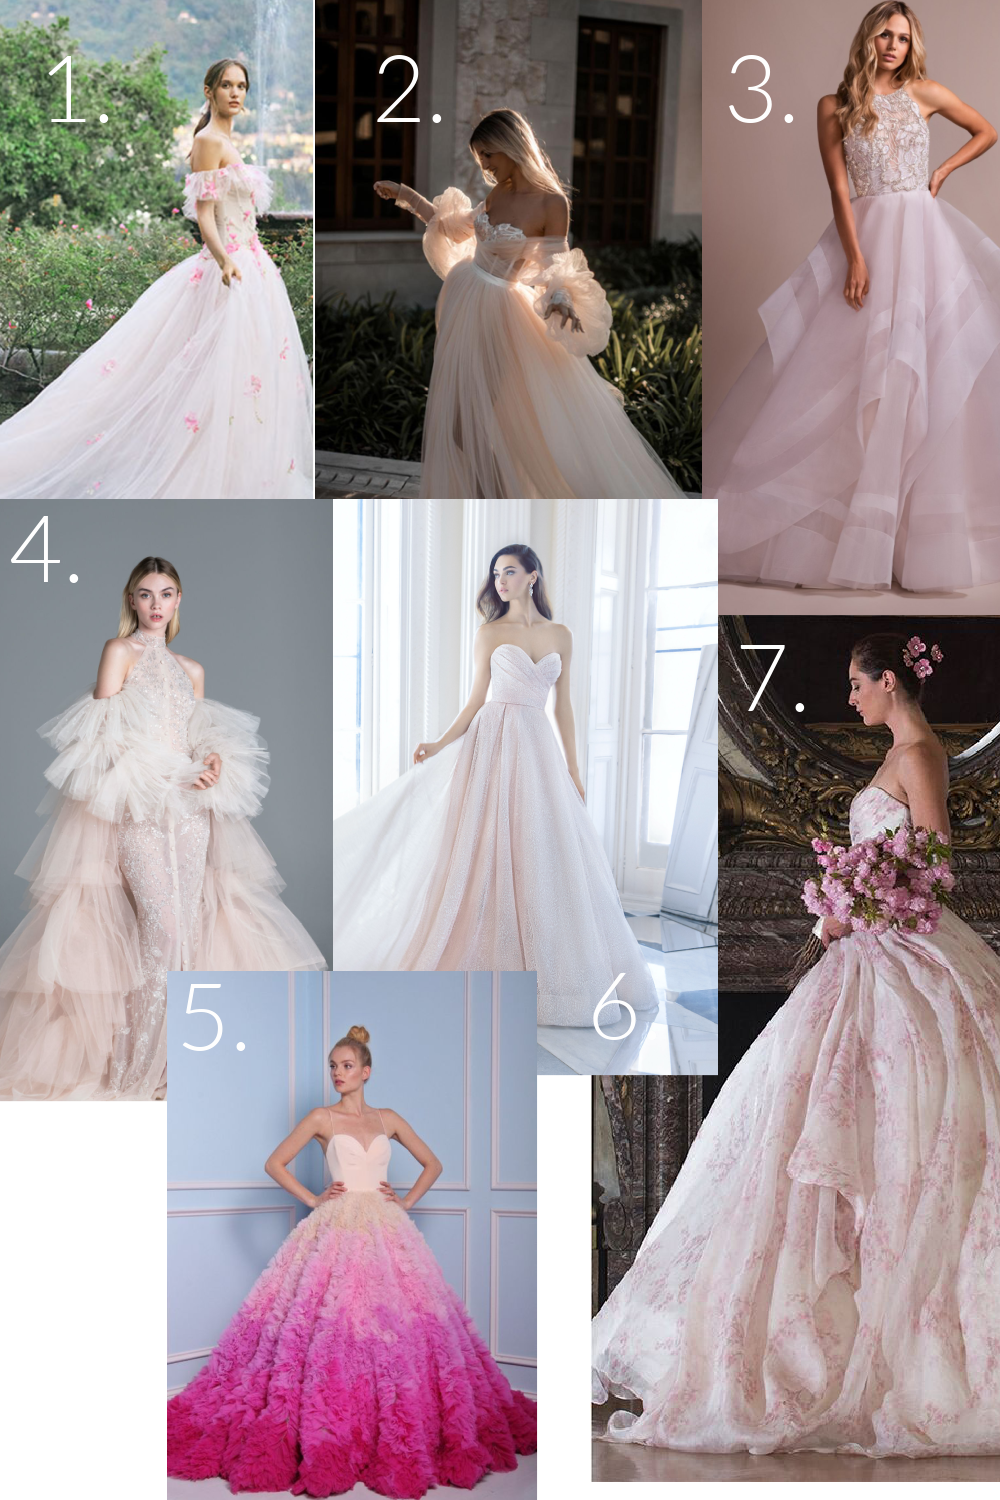 Choose A Wedding Gown That Complements Your Wedding Theme